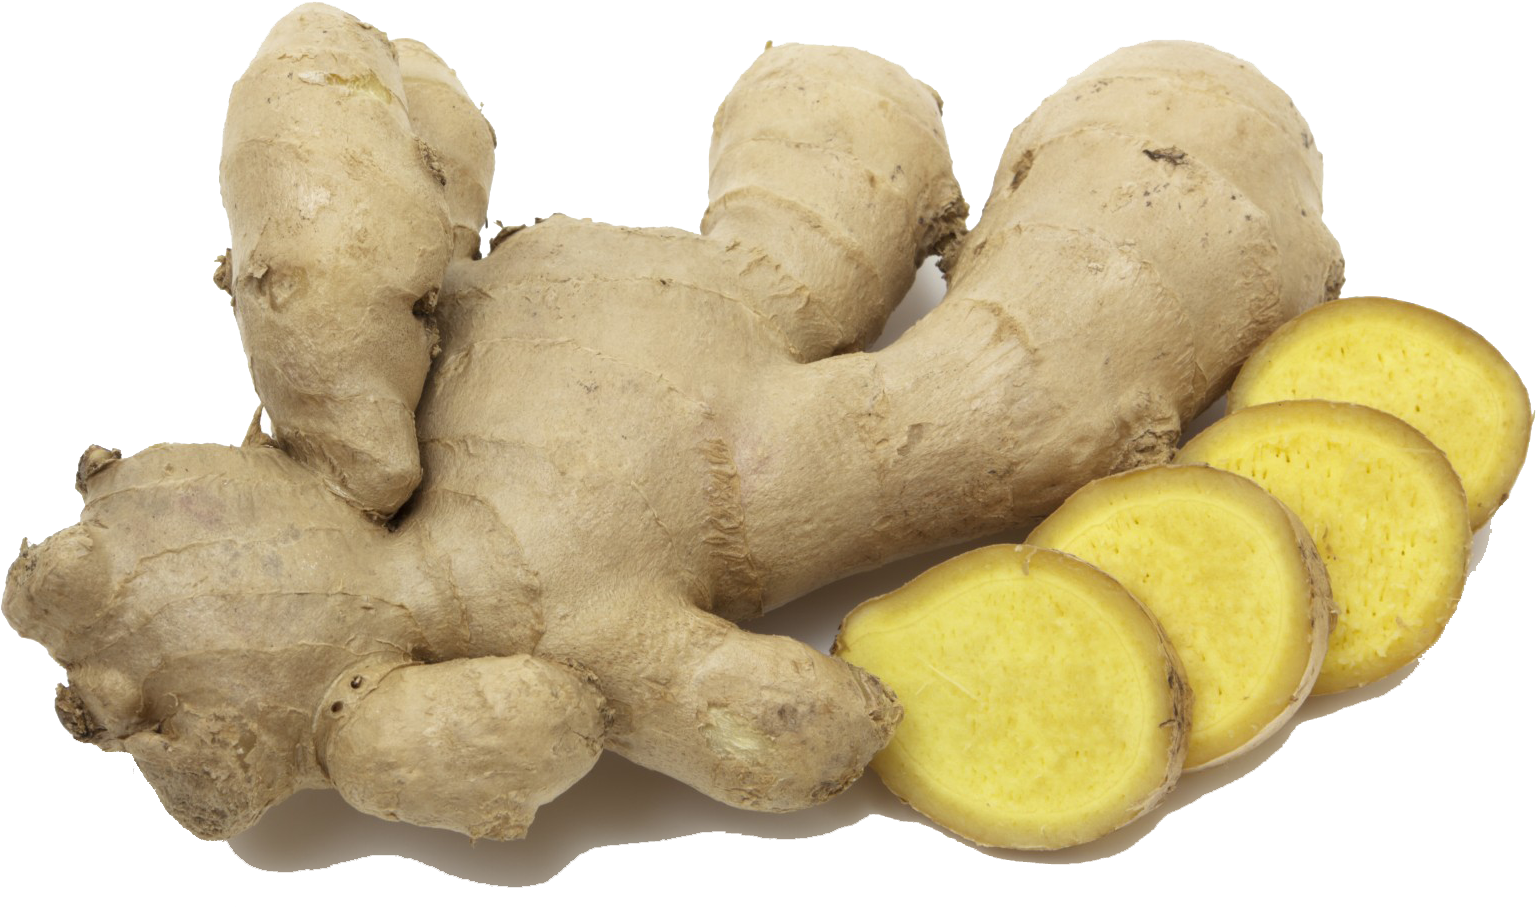 A Ginger Root And Slices Of Ginger